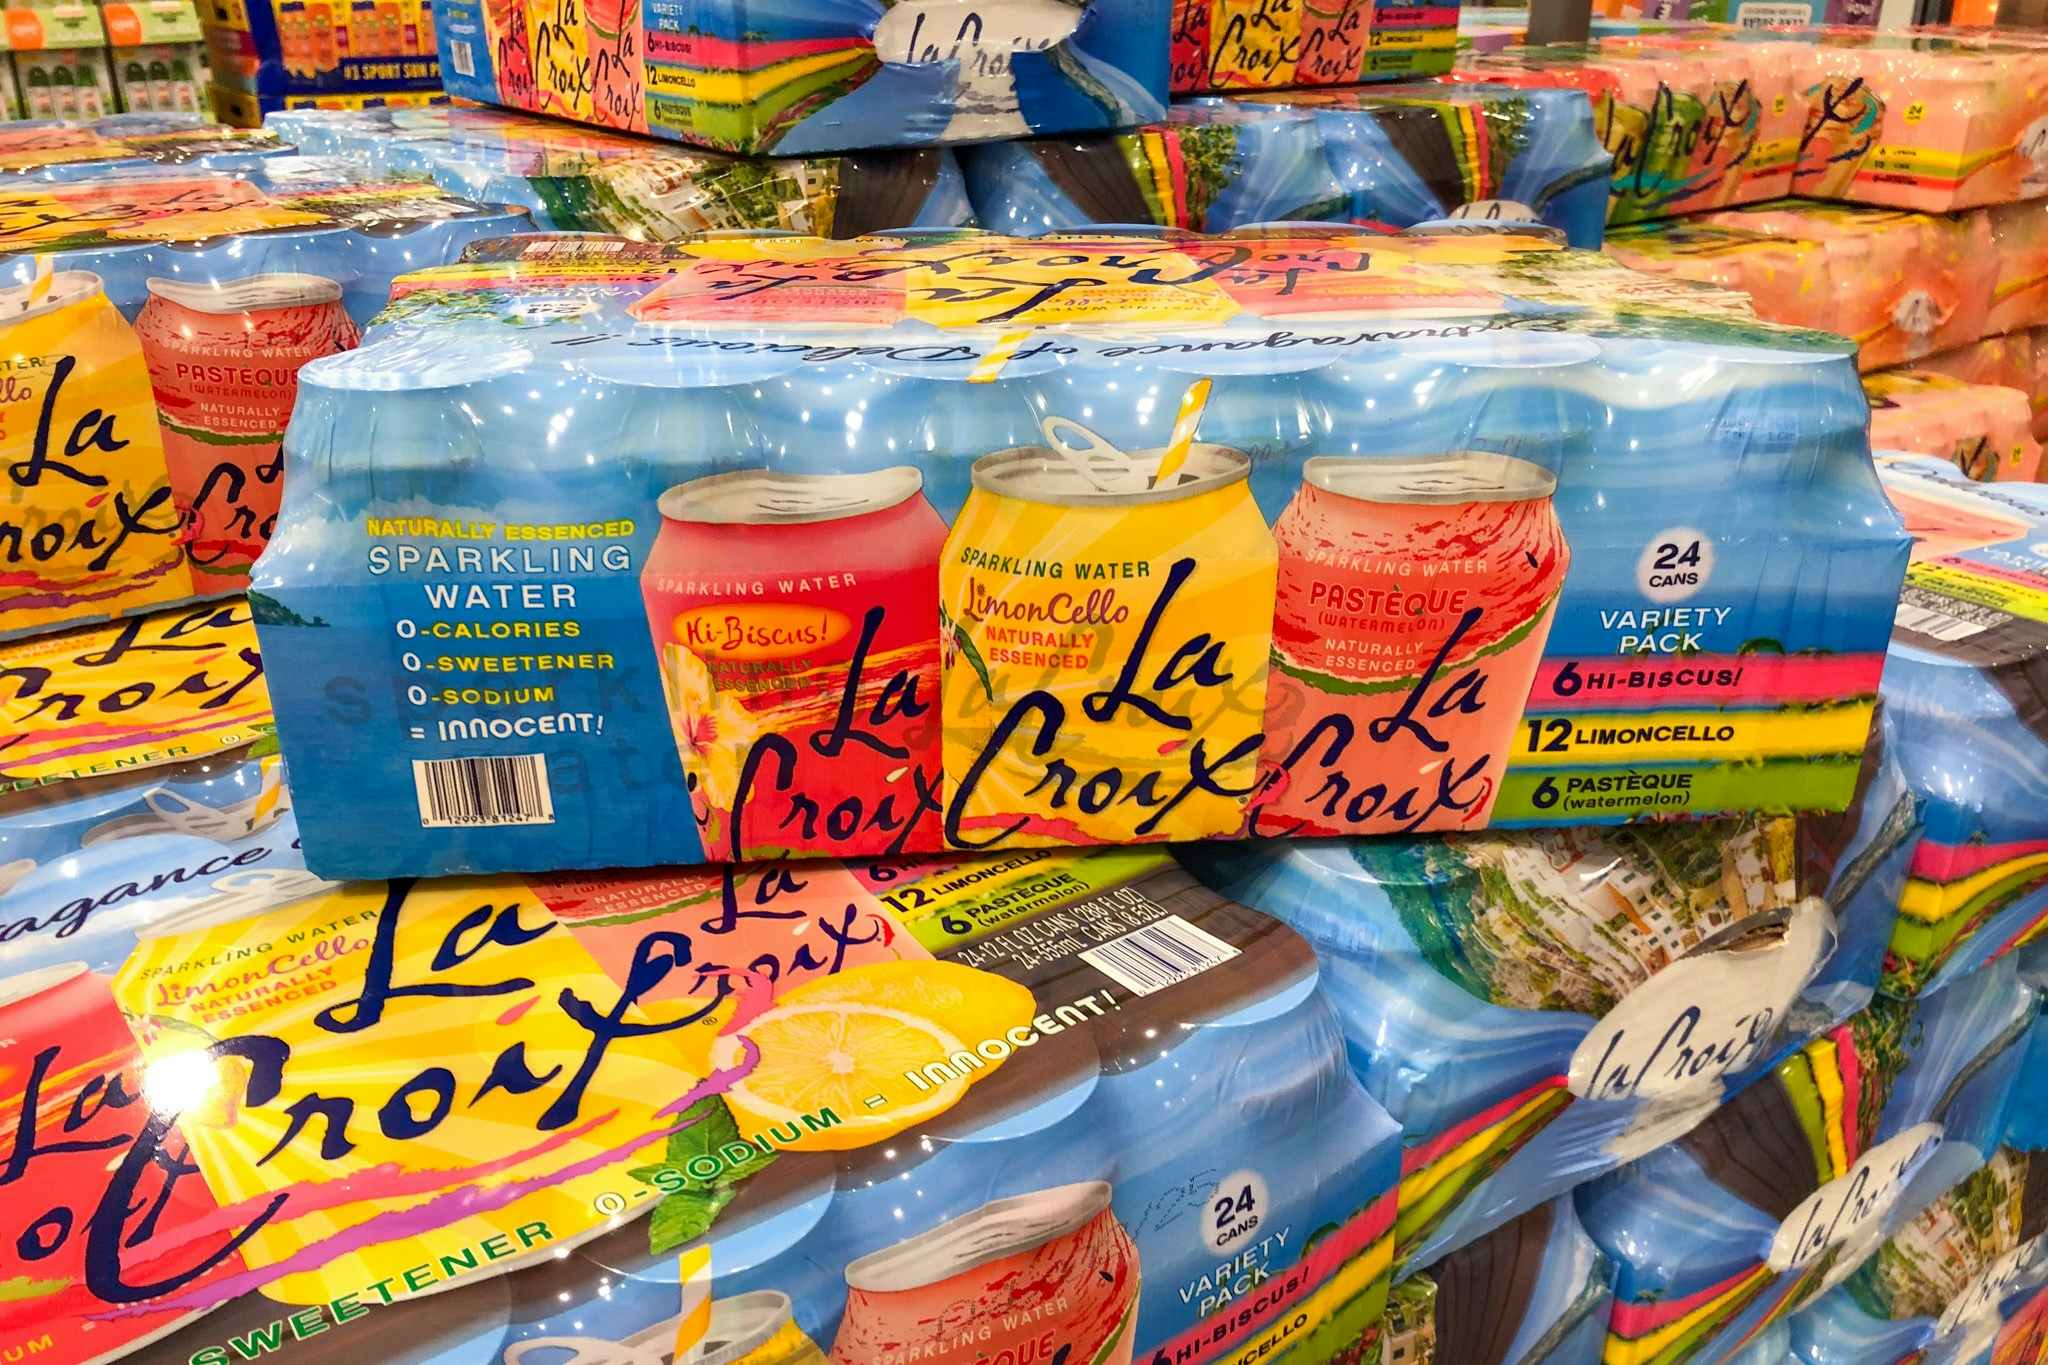 LaCroix Sparkling Water 24-Pack, Only $6.49 at Costco (Reg. $8.99)